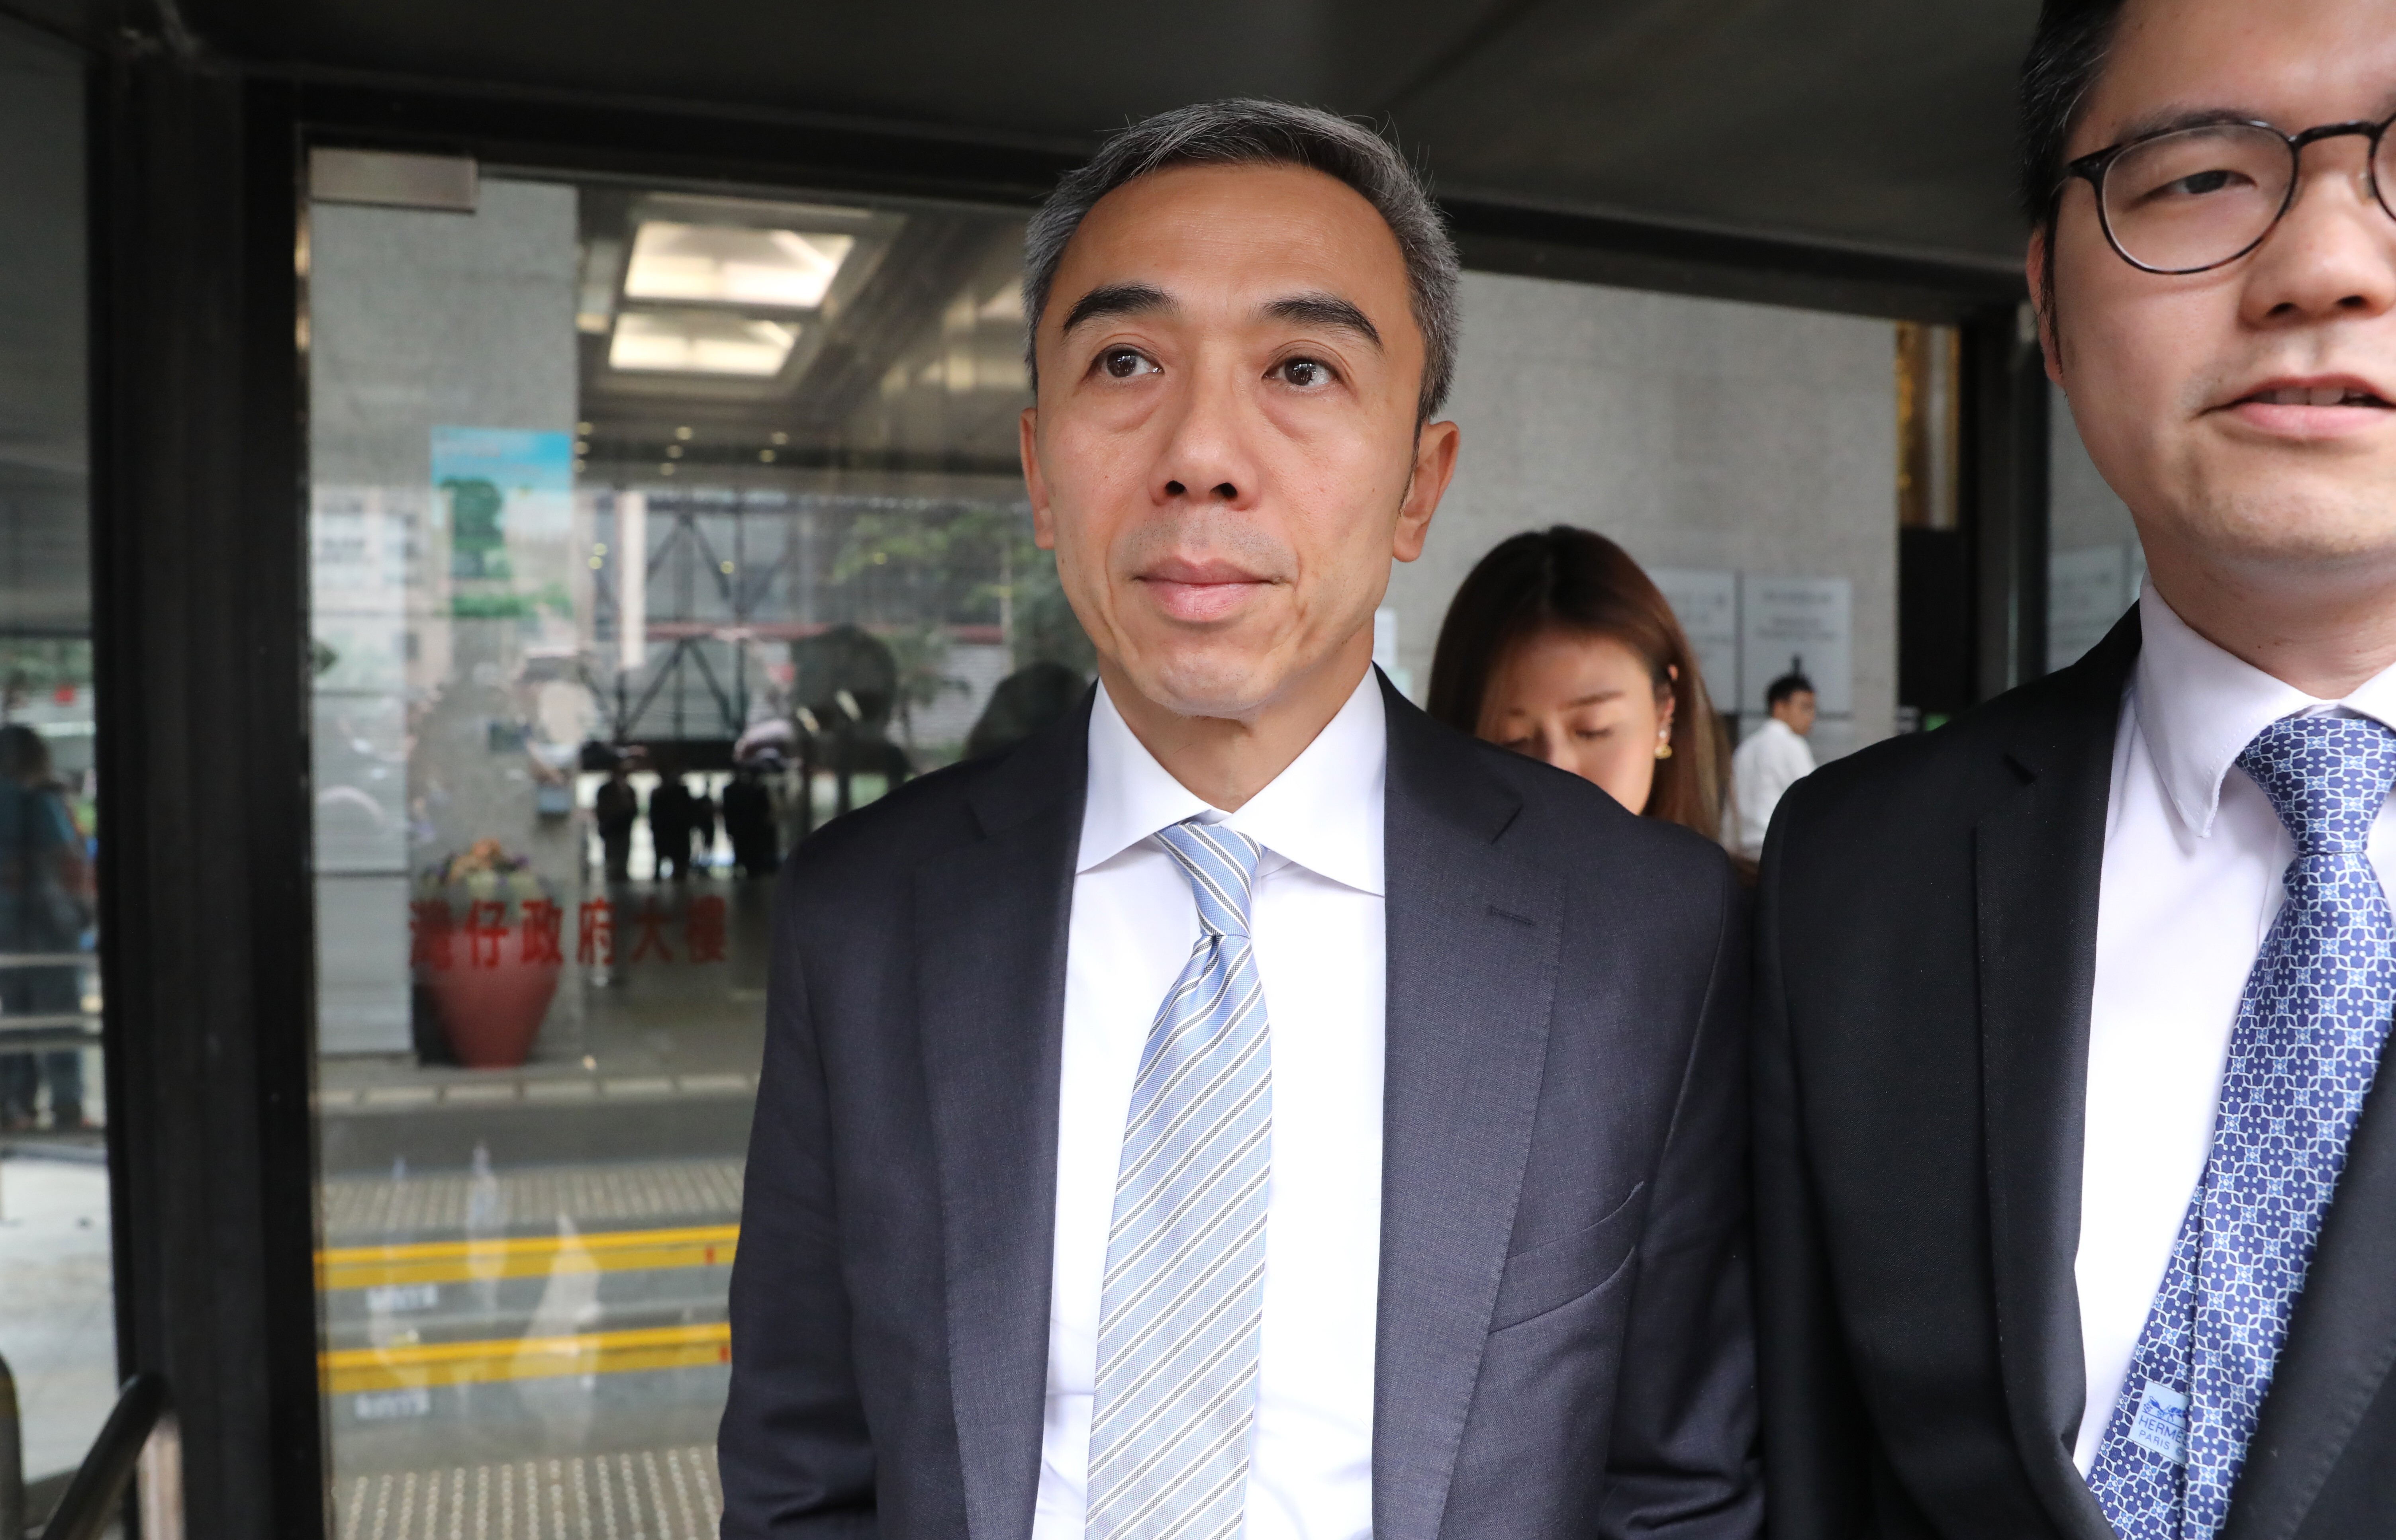 Former civil servant Wilson Fung is appealing against his misconduct investigation. Photo: K. Y. Cheng